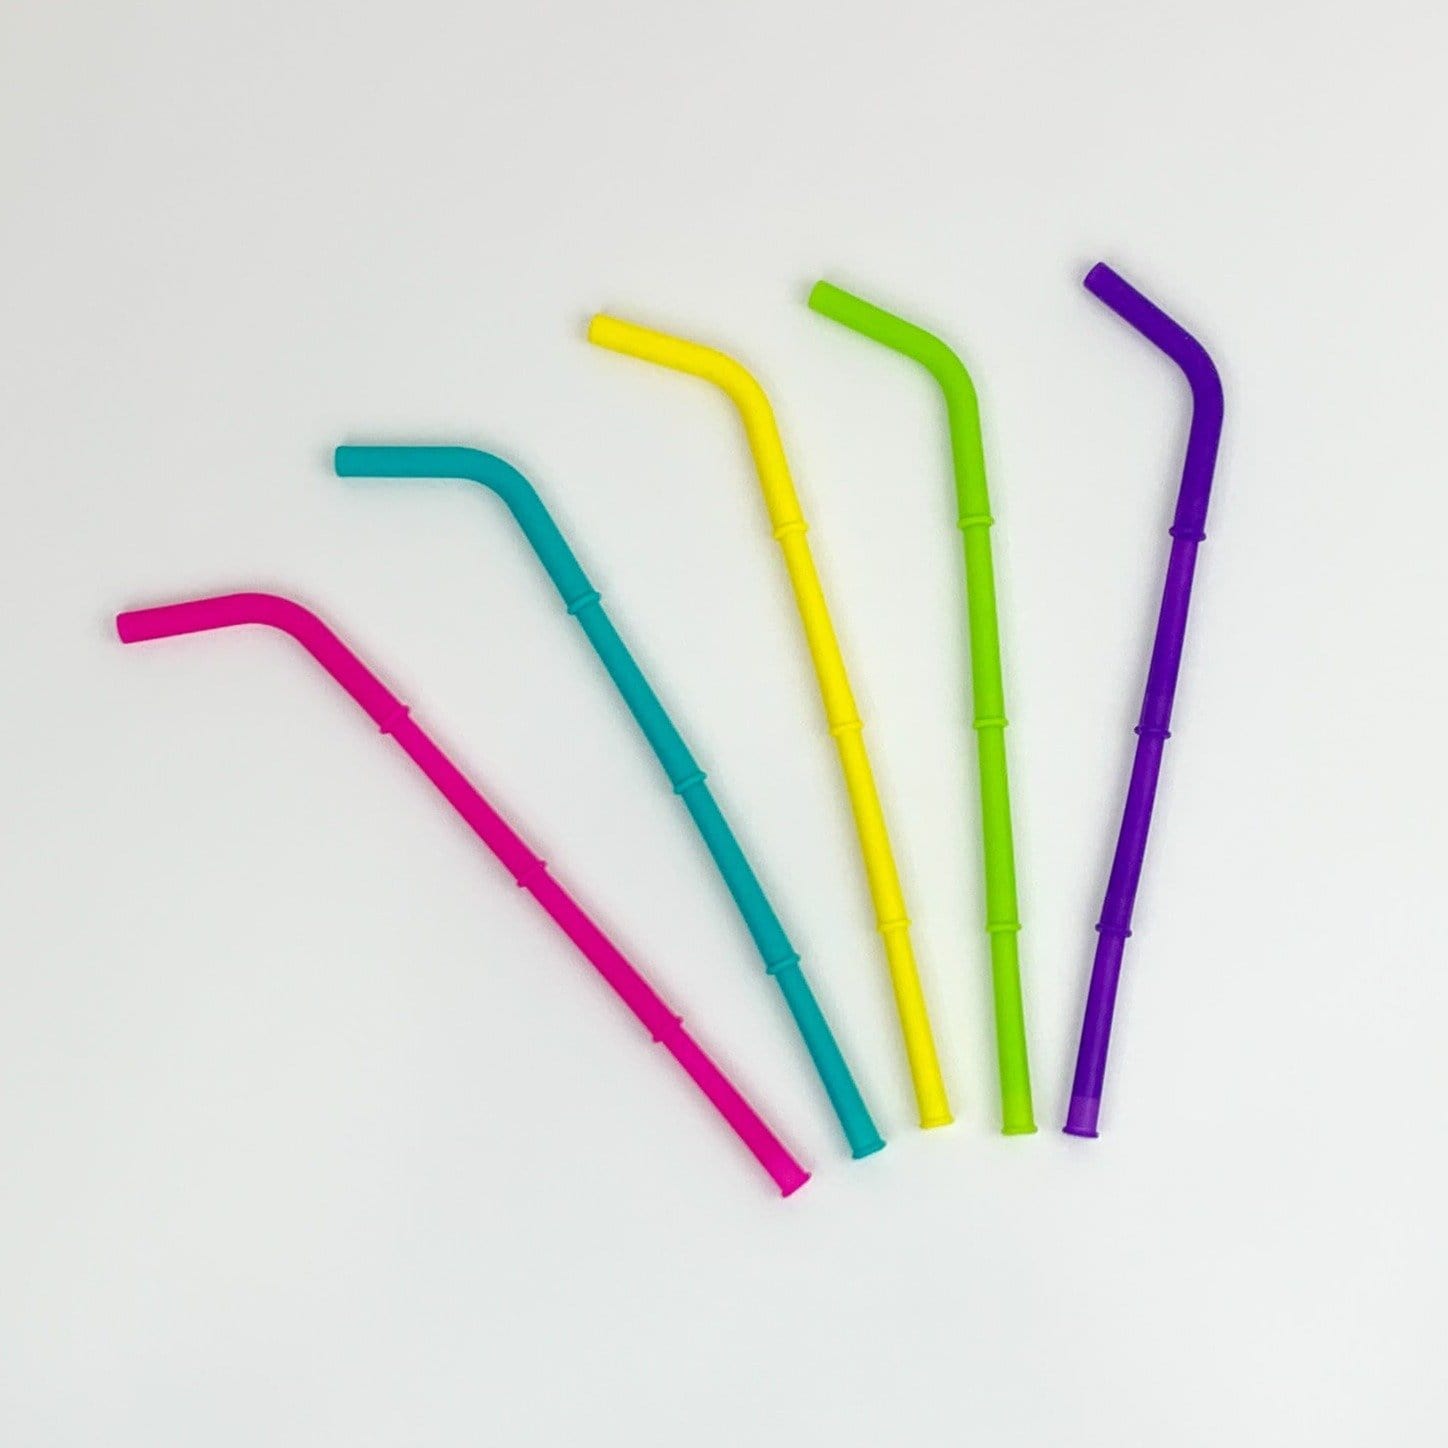 Big Bee Little Bee Build A Straw Reusable Silicone Drinking Straws